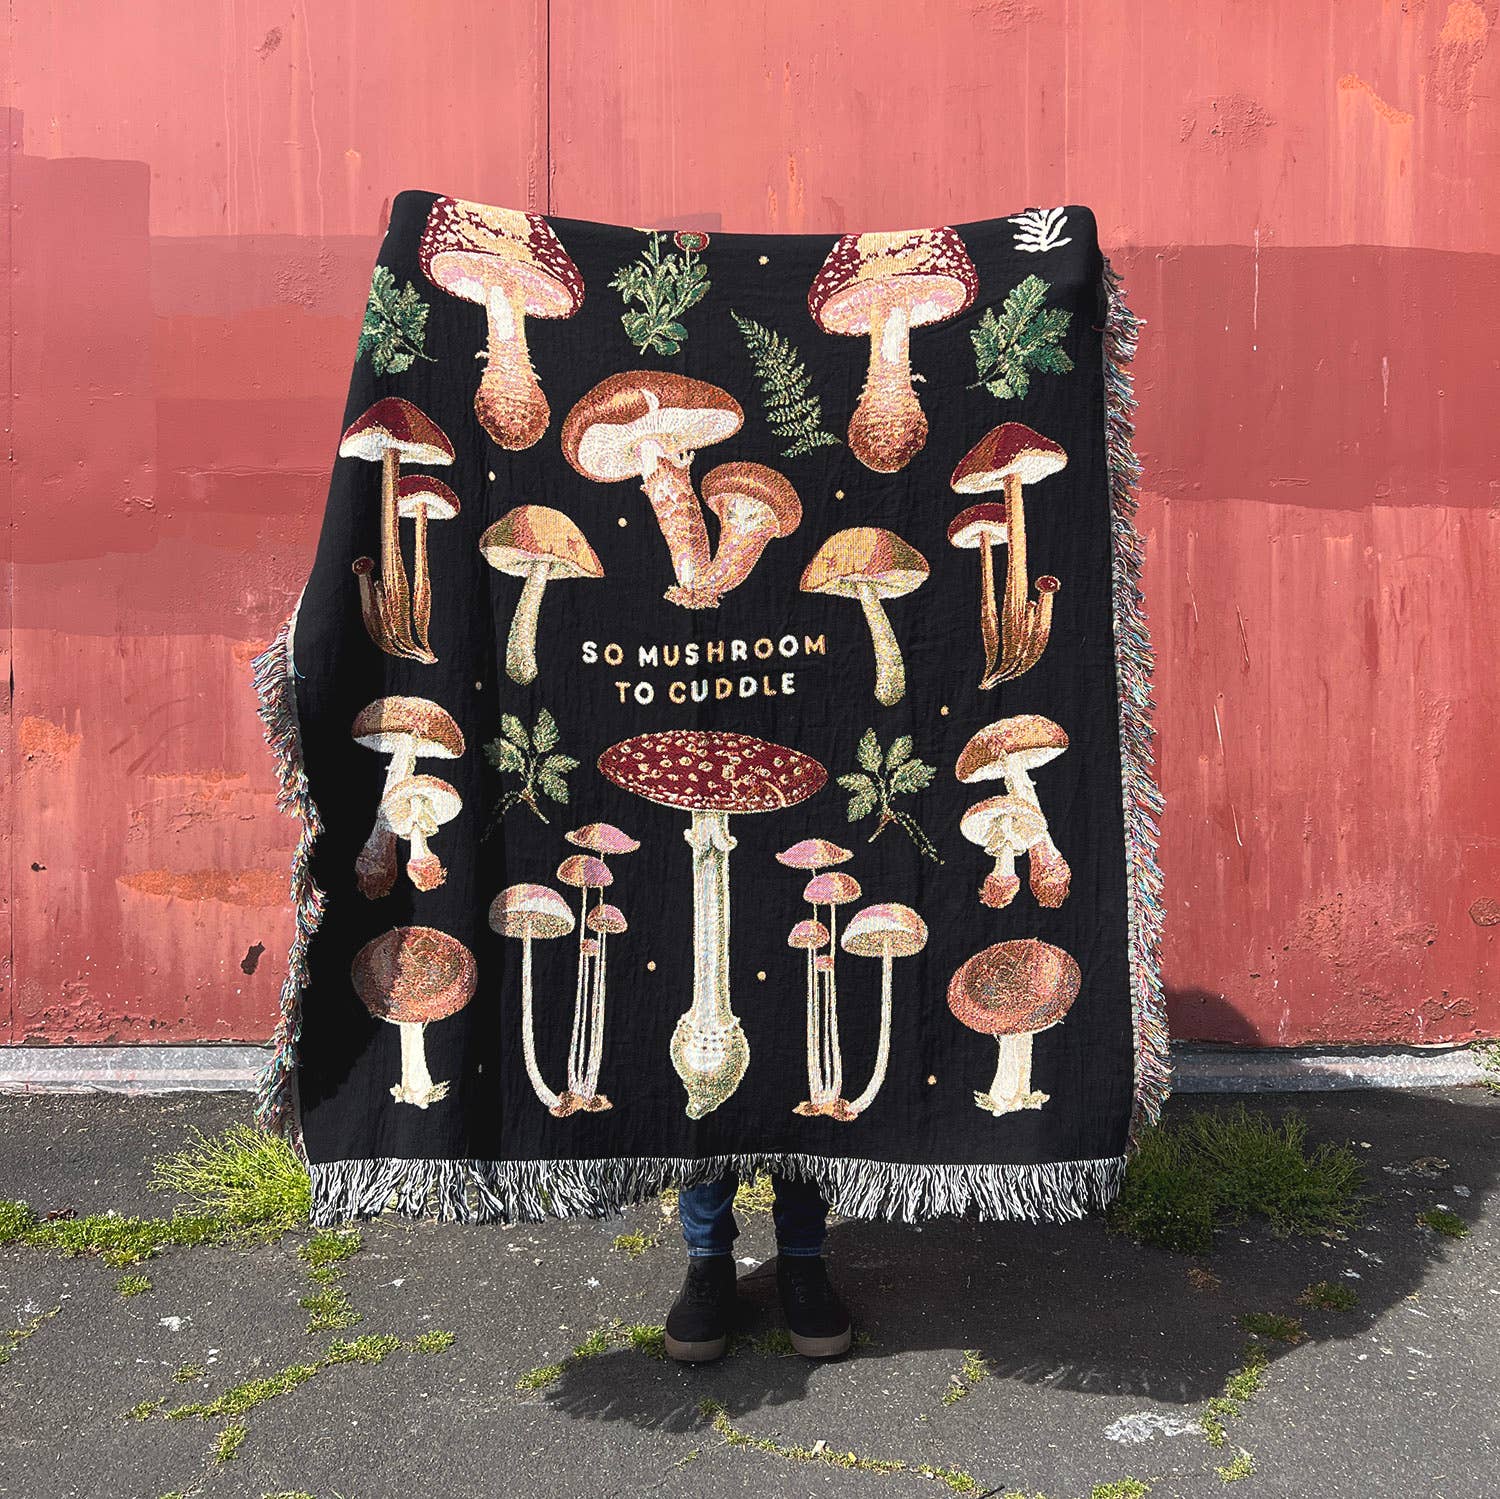 Mushroom blanket held up in front of red wall. Blanket has mushrooms and foliage on it along with text that reads "So Mushroom To Cuddle" 